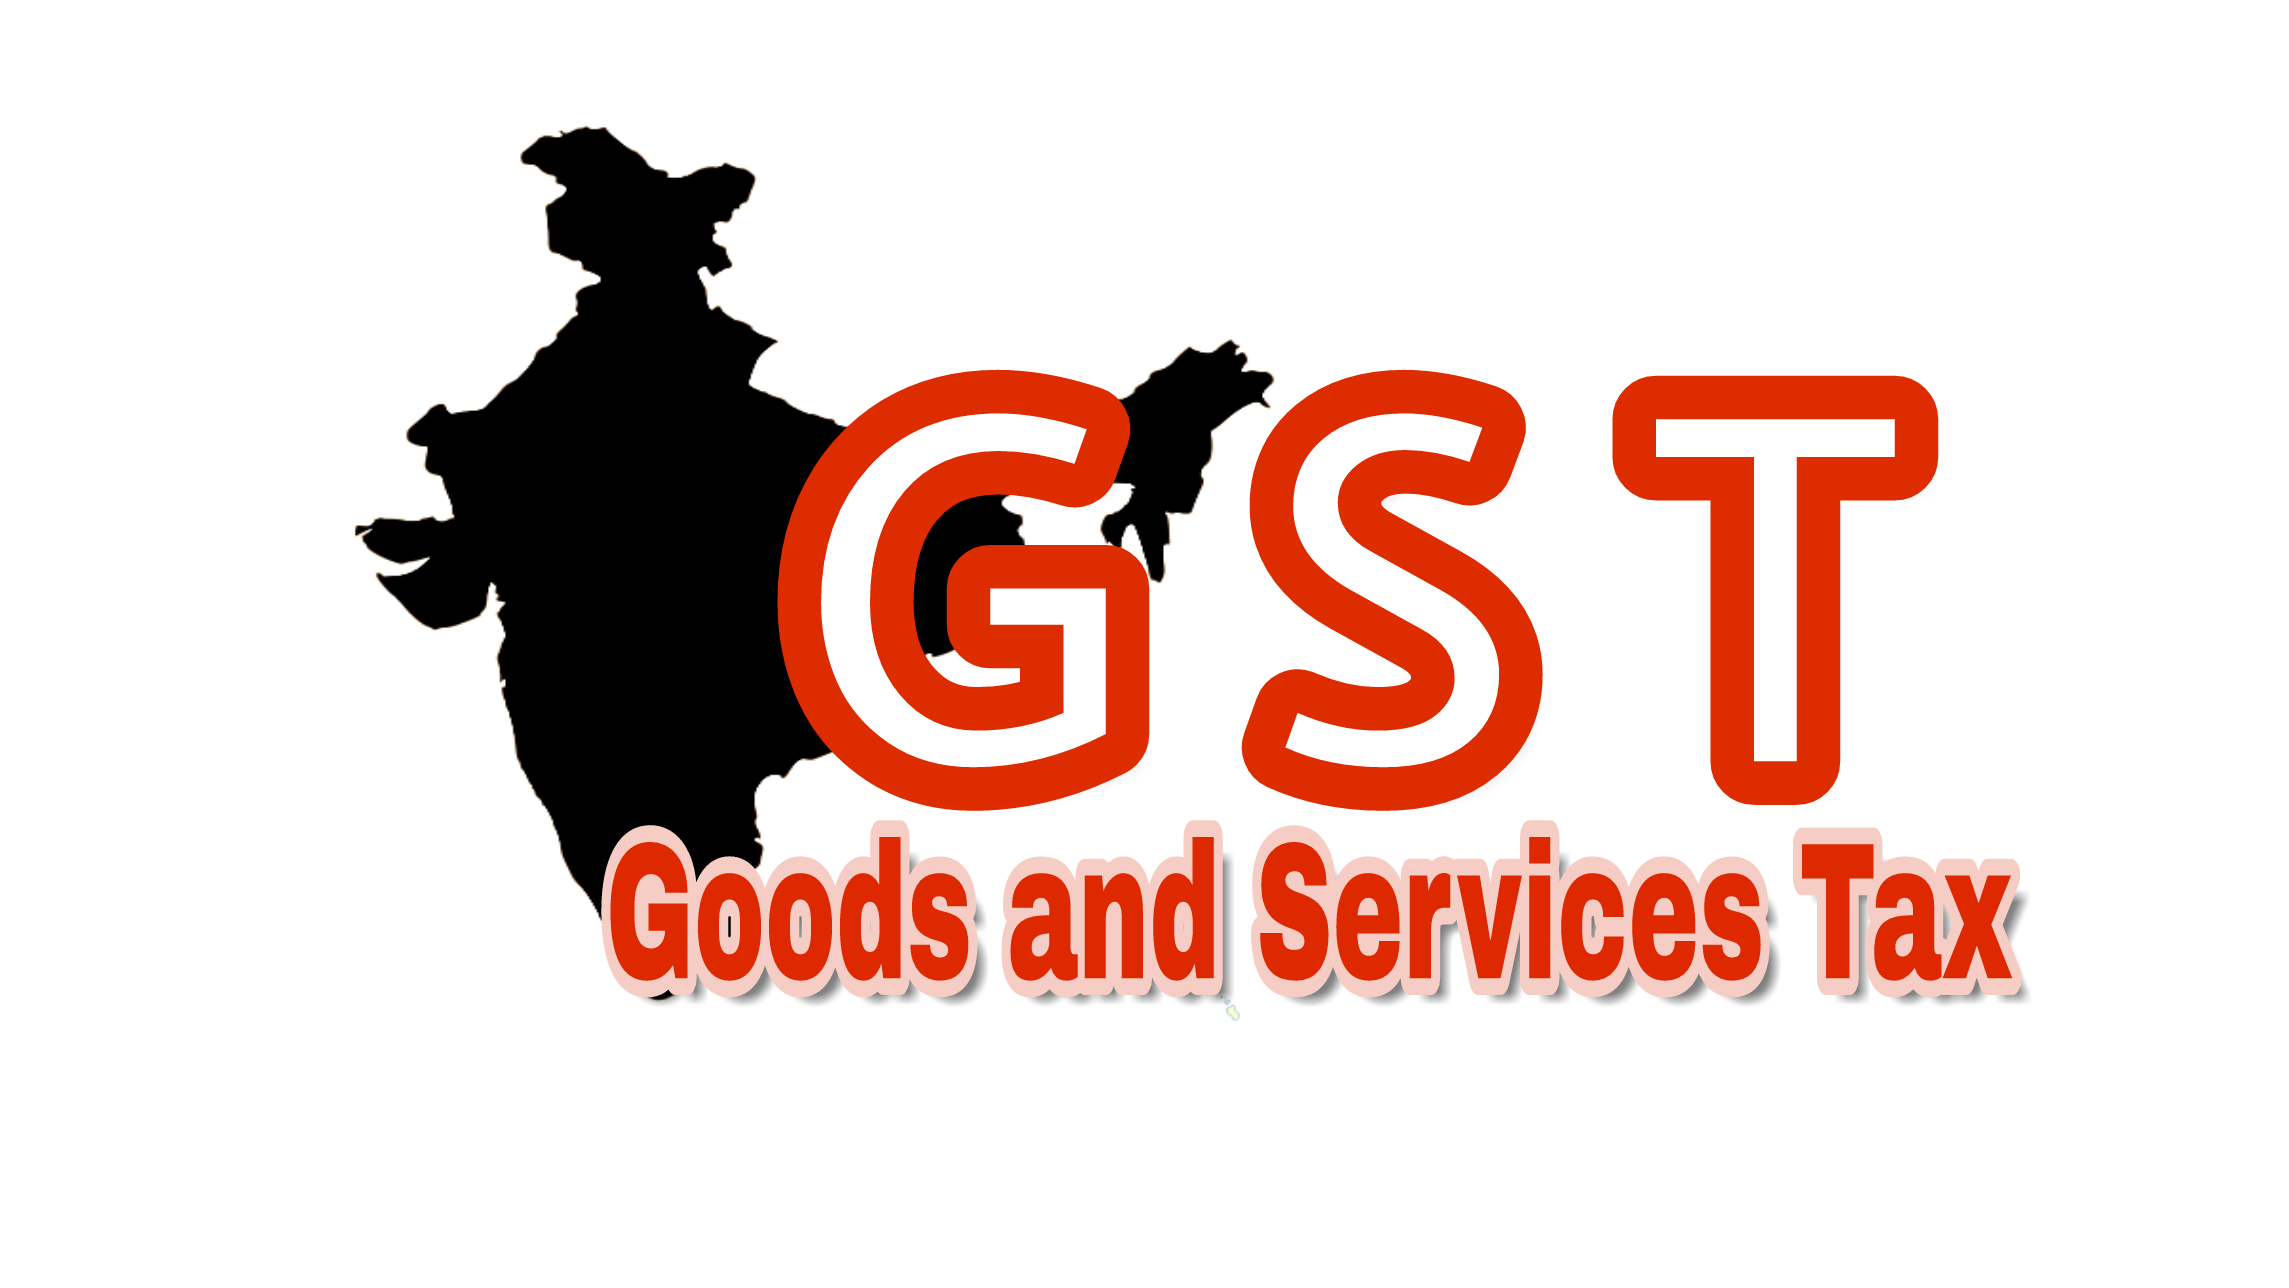 GST - Goods and services tax!